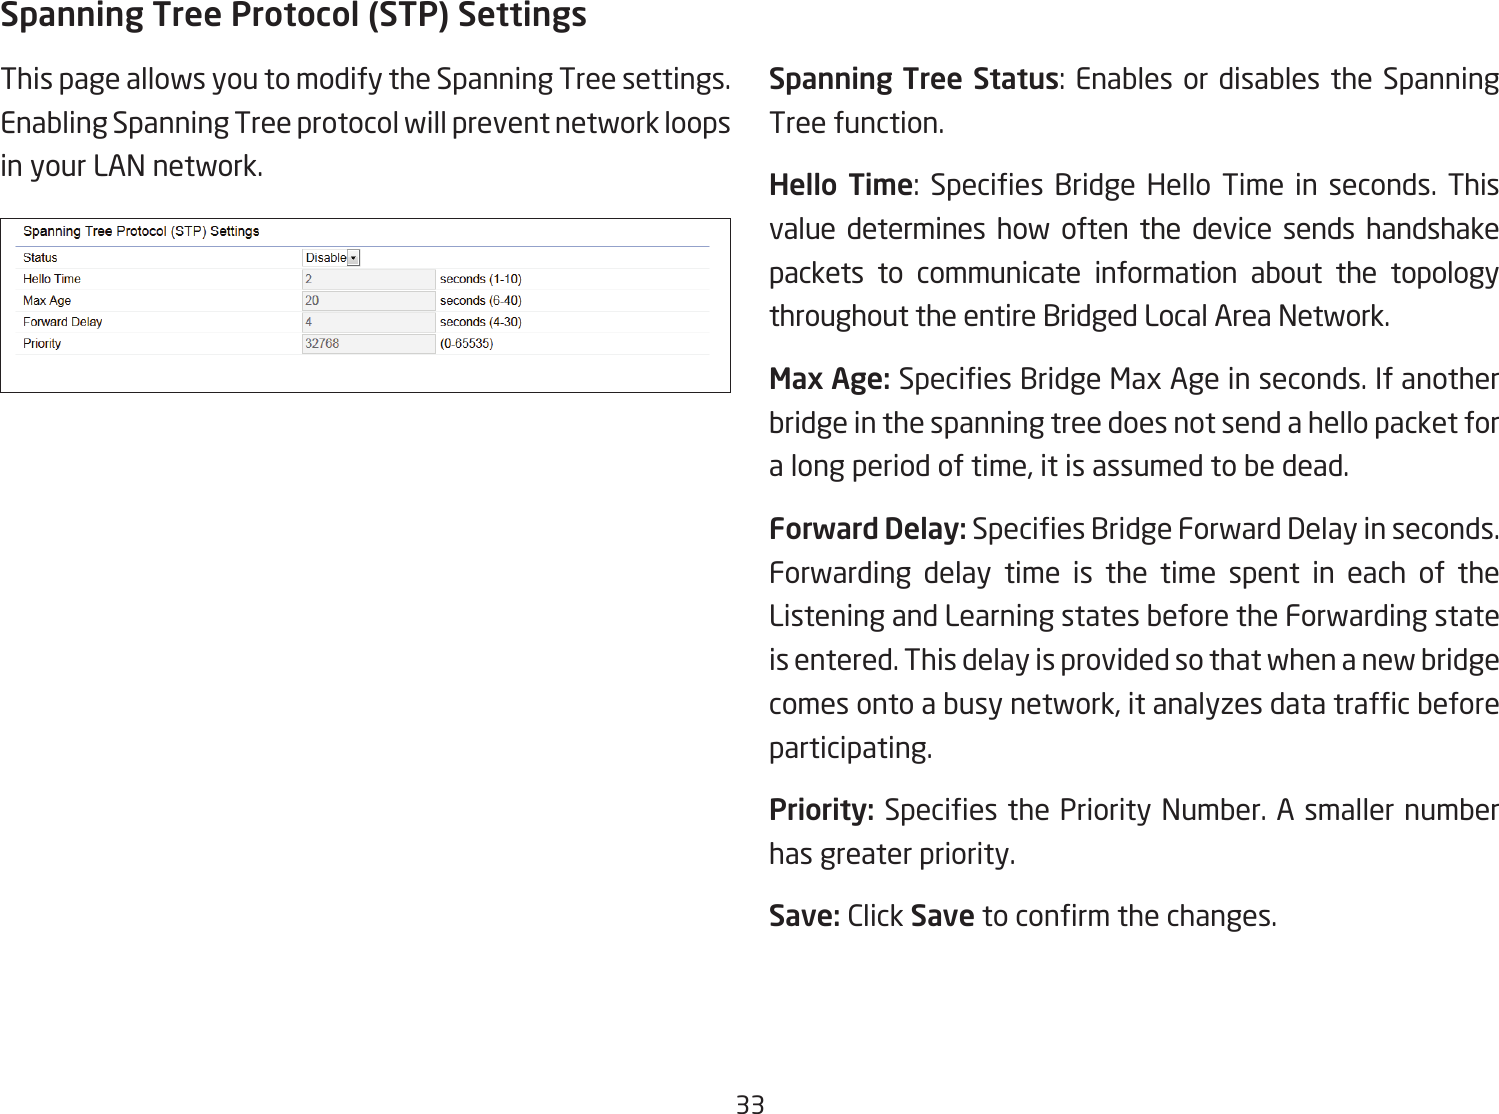 33Spanning Tree Protocol (STP) SettingsThis page allows you to modify the Spanning Tree settings. Enabling Spanning Tree protocol will prevent network loops in your LAN network. Spanning Tree Status: Enables or disables the Spanning Tree function.Hello  Time: Species Bridge Hello Time in seconds. Thisvalue determines how often the device sends handshake packets to communicate information about the topology throughout the entire Bridged Local Area Network.Max Age: SpeciesBridgeMaxAgeinseconds.Ifanotherbridge in the spanning tree does not send a hello packet for a long period of time, it is assumed to be dead.Forward Delay:SpeciesBridgeForwardDelayinseconds.Forwarding delay time is the time spent in each of the Listening and Learning states before the Forwarding state is entered. This delay is provided so that when a new bridge comesontoabusynetwork,itanalyzesdatatrafcbeforeparticipating.Priority: SpeciesthePriorityNumber.Asmallernumberhas greater priority.Save: Click Savetoconrmthechanges.